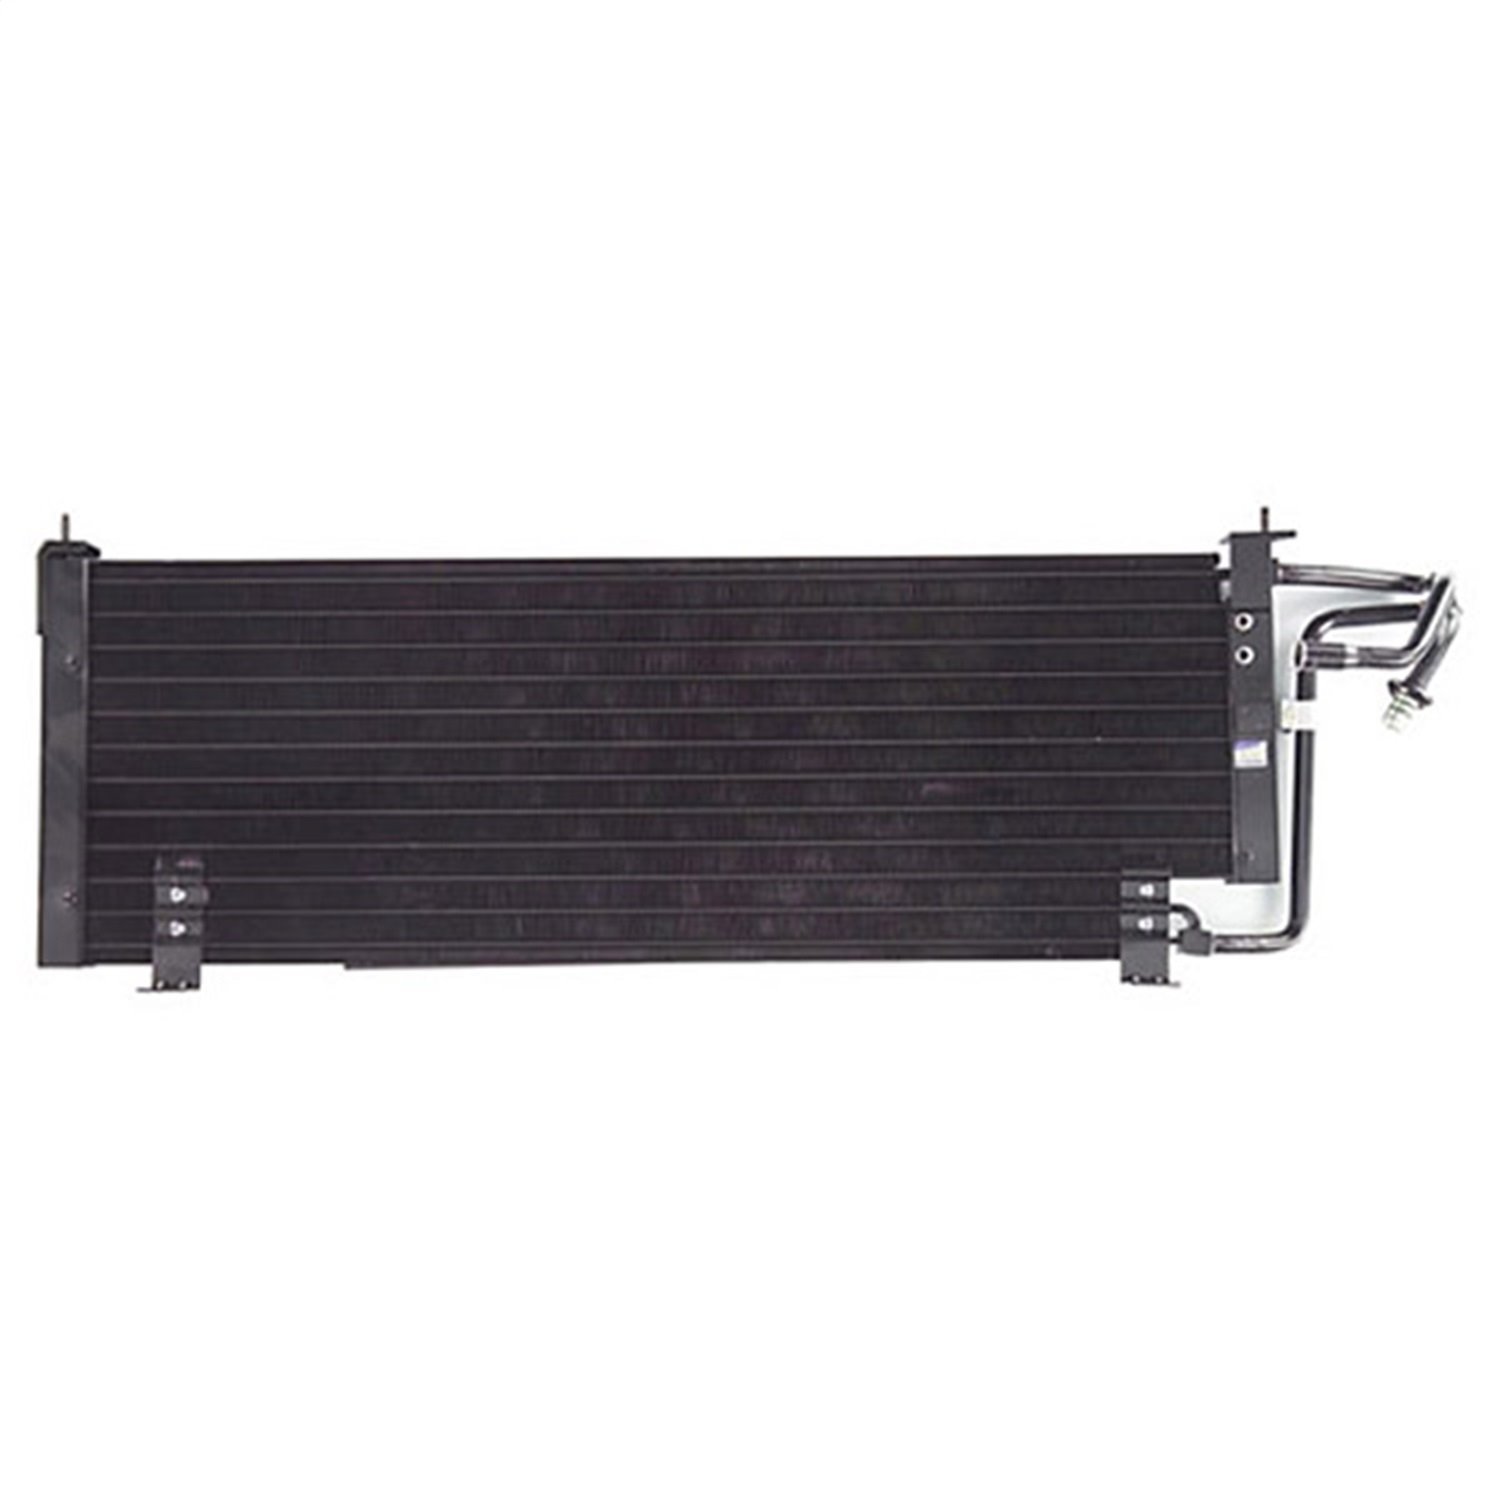 This ac condenser from Omix-ADA fits 97-01 Jeep